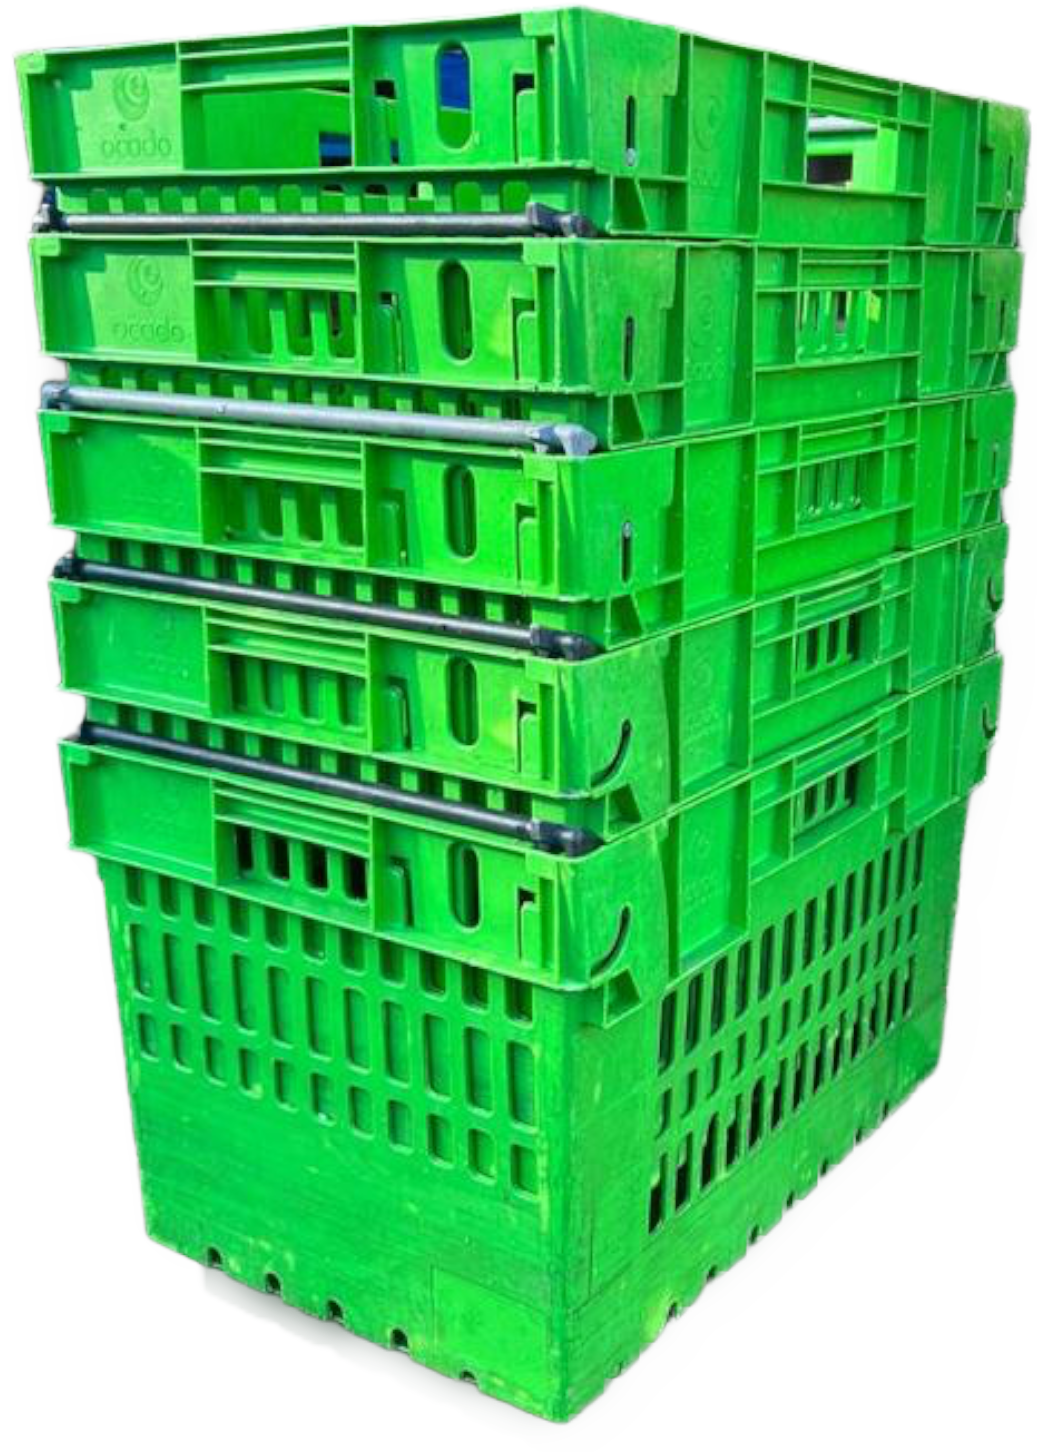 UK Suppliers Of 400x300x300 Black Eco Lidded Container (28 Ltr) For Supermarkets